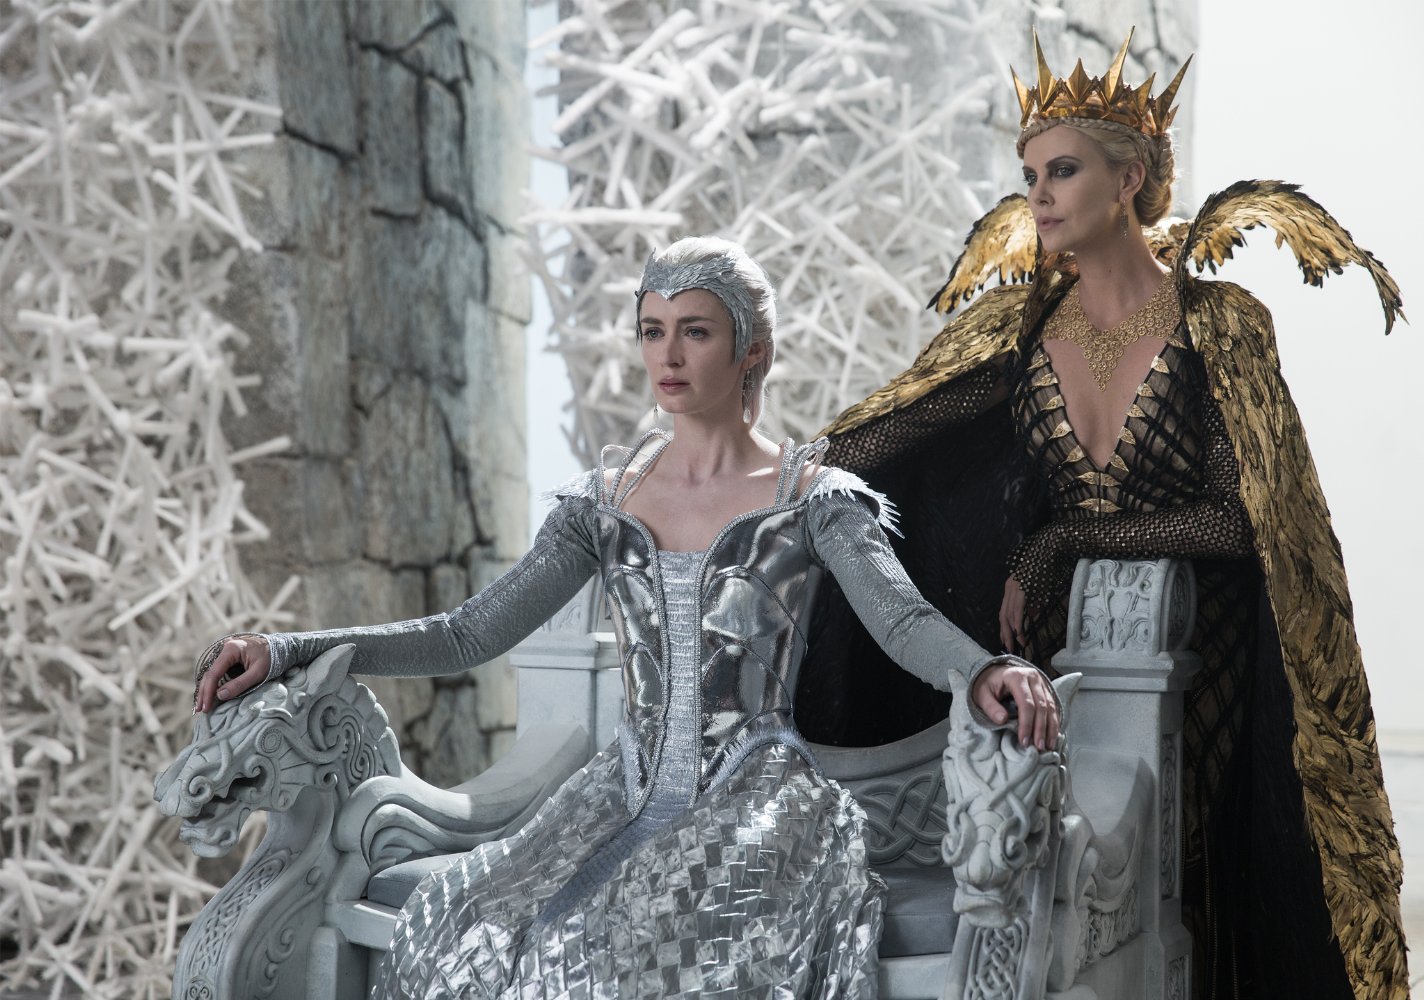 Emily Blunt and Charlize Theron in The Huntsman: Winter's War